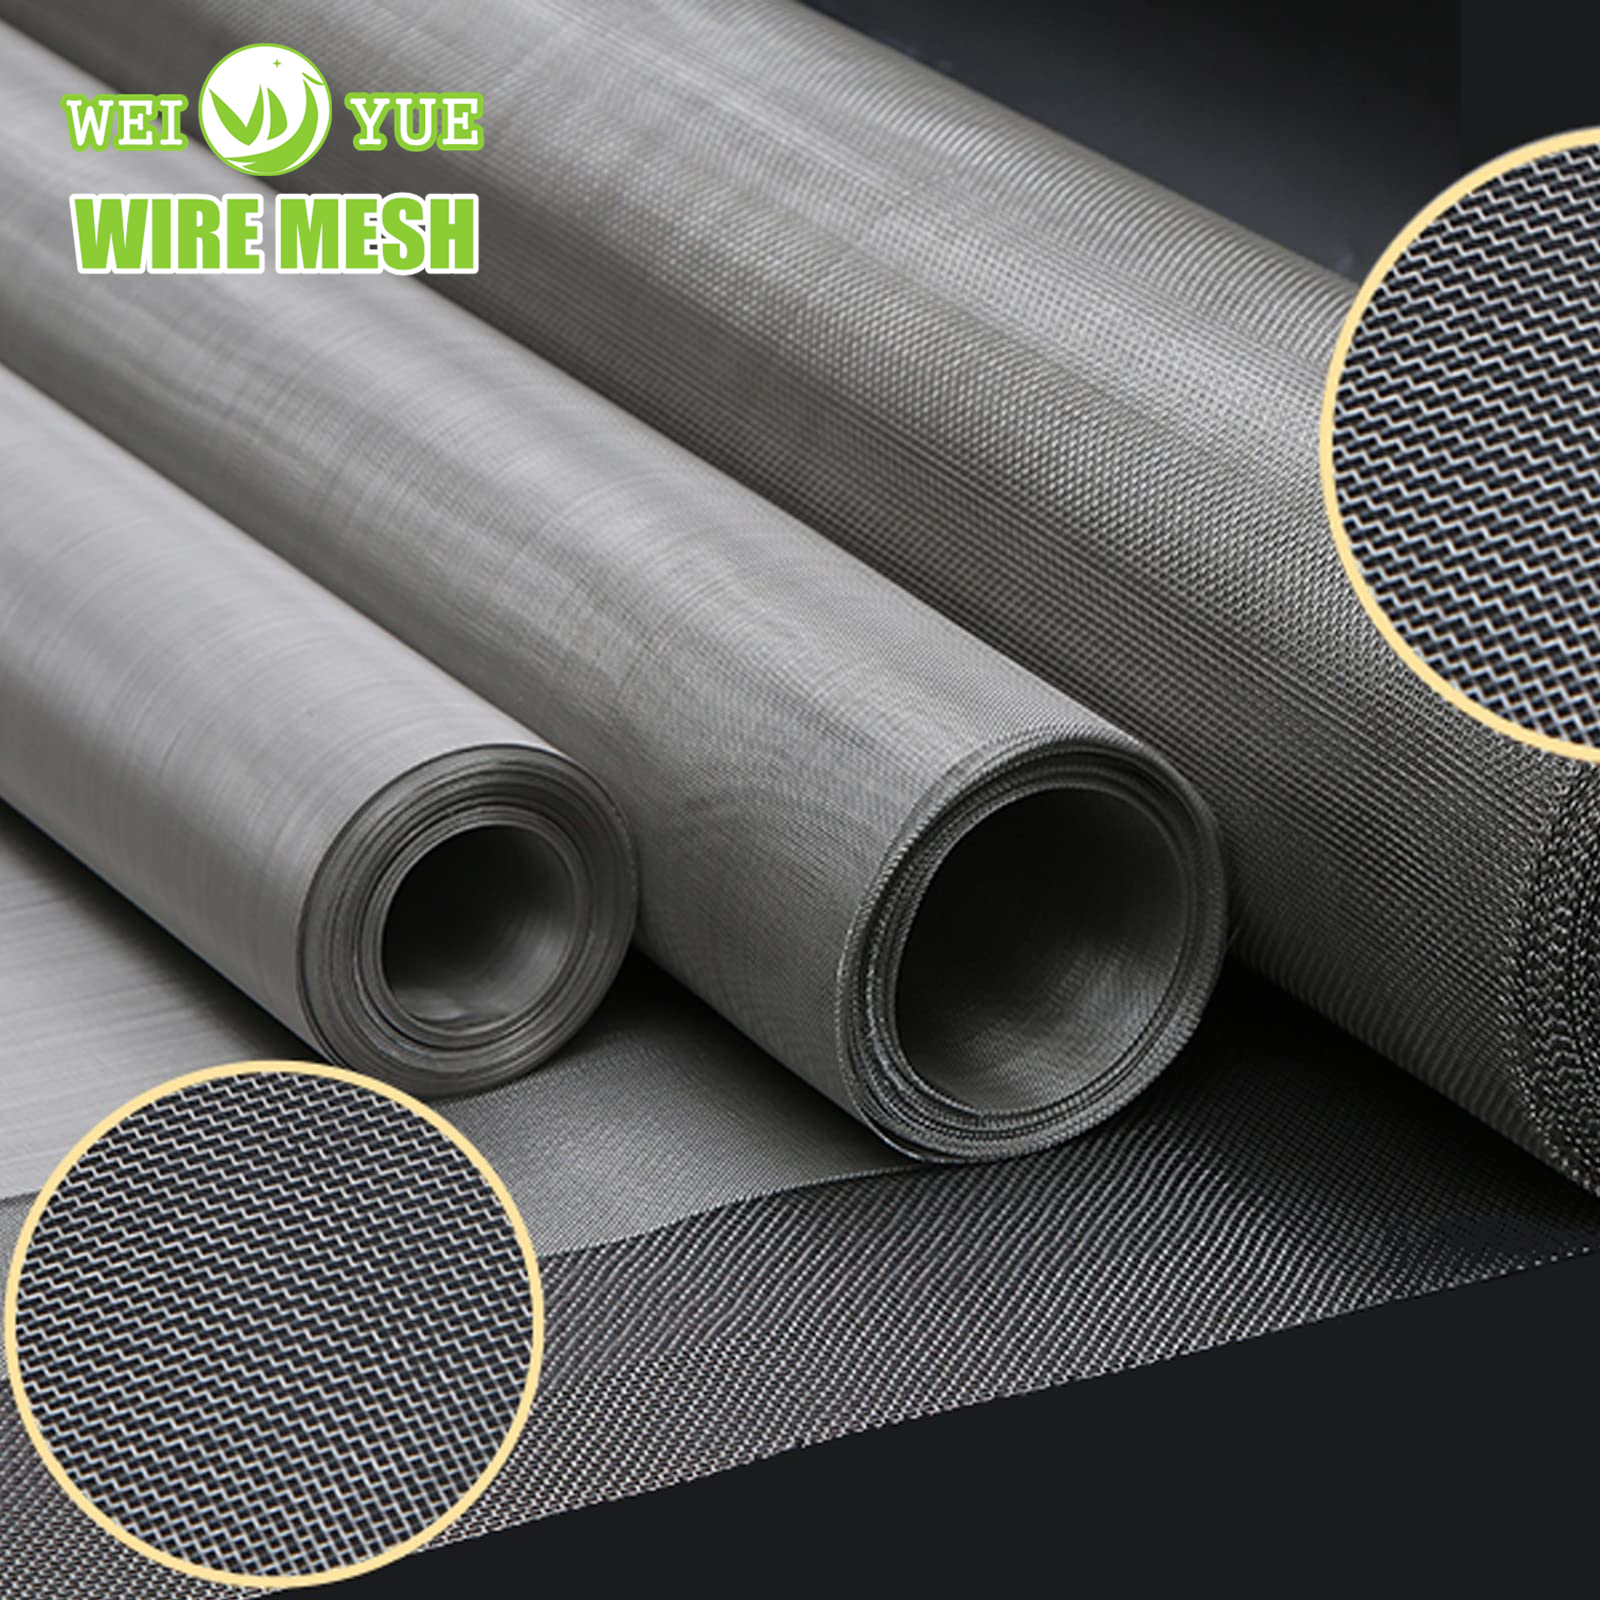 High Quality SS304 316 Stainless Steel 3-500 Mesh Square Metal Dutch Weave Sieving Screen Filter Wire Mesh for Polymer Extruder